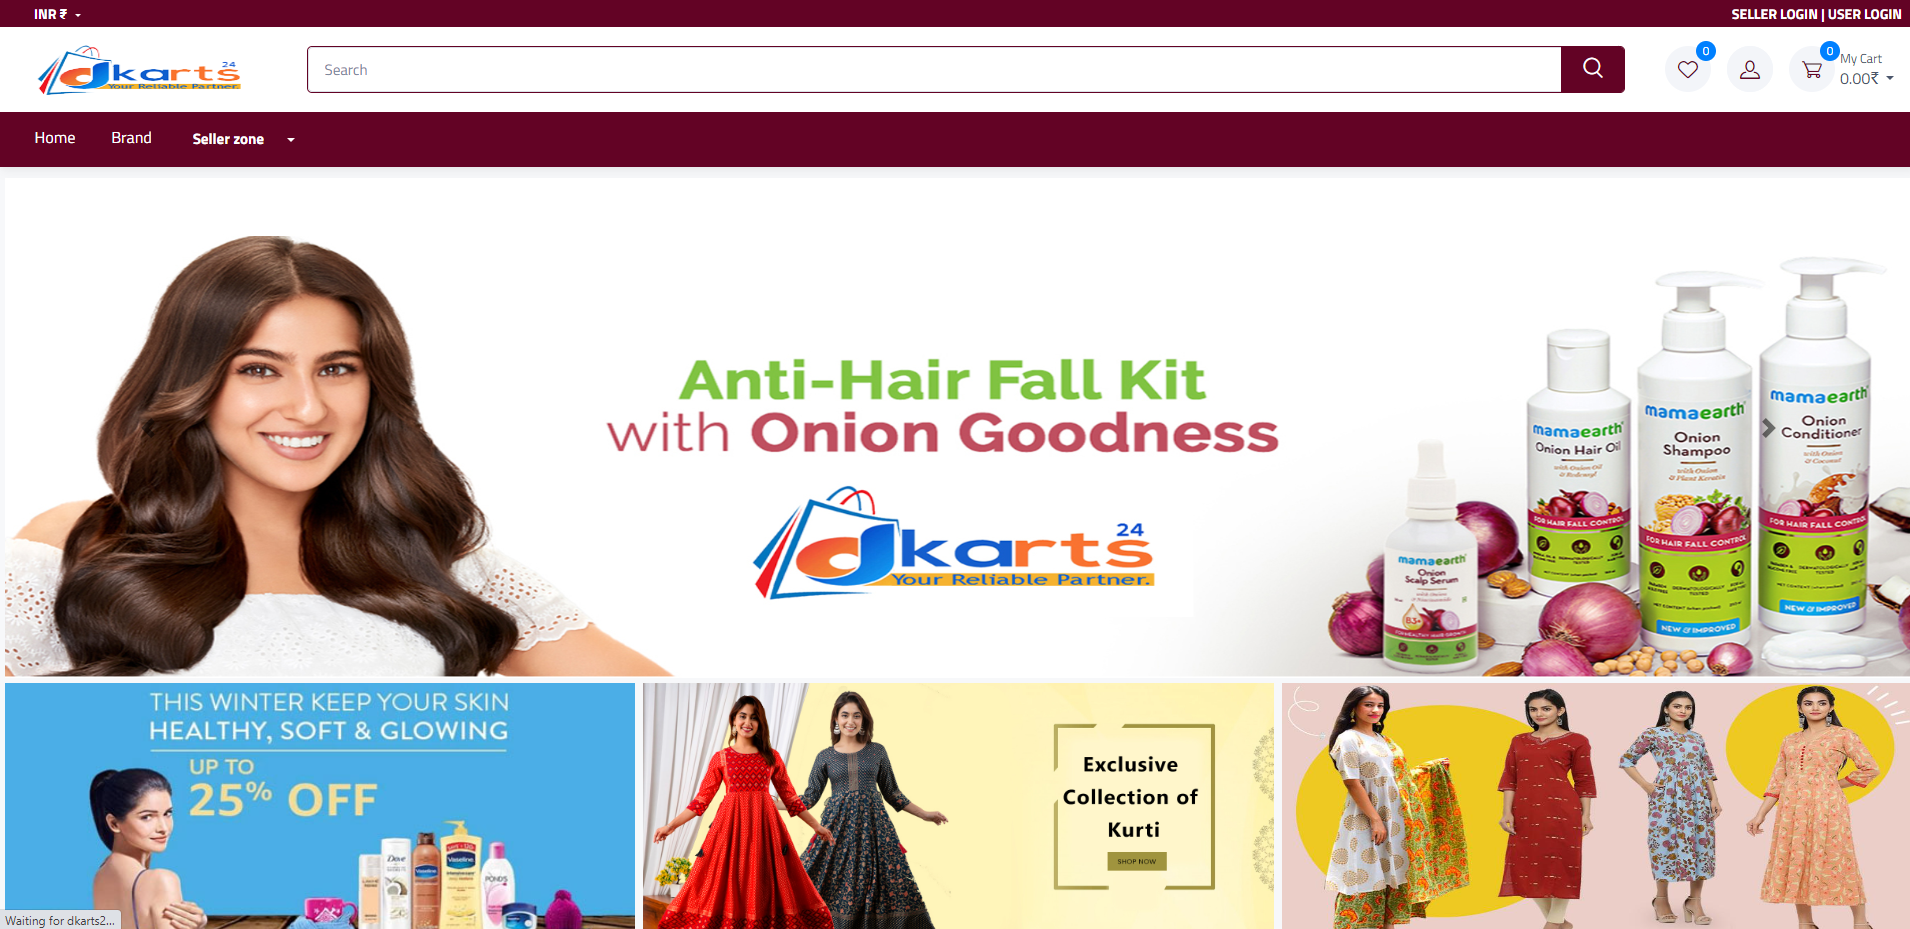 La

  
    
 

Anti-Hair Fall Kit
with Onion Goodness Ee

an
(Irs

Your Reliable Partner.

mamaearth

| mamaearth

 

   

Onion
Shampoo

THIS WINTER KEEP YOUR SKIN
HEALTHY, SOFT & GLOWING ¥ pr

 
   
 
  

UPTO Exclusive
Ey ri OFF | Collection of
9 Kurti
L : fm